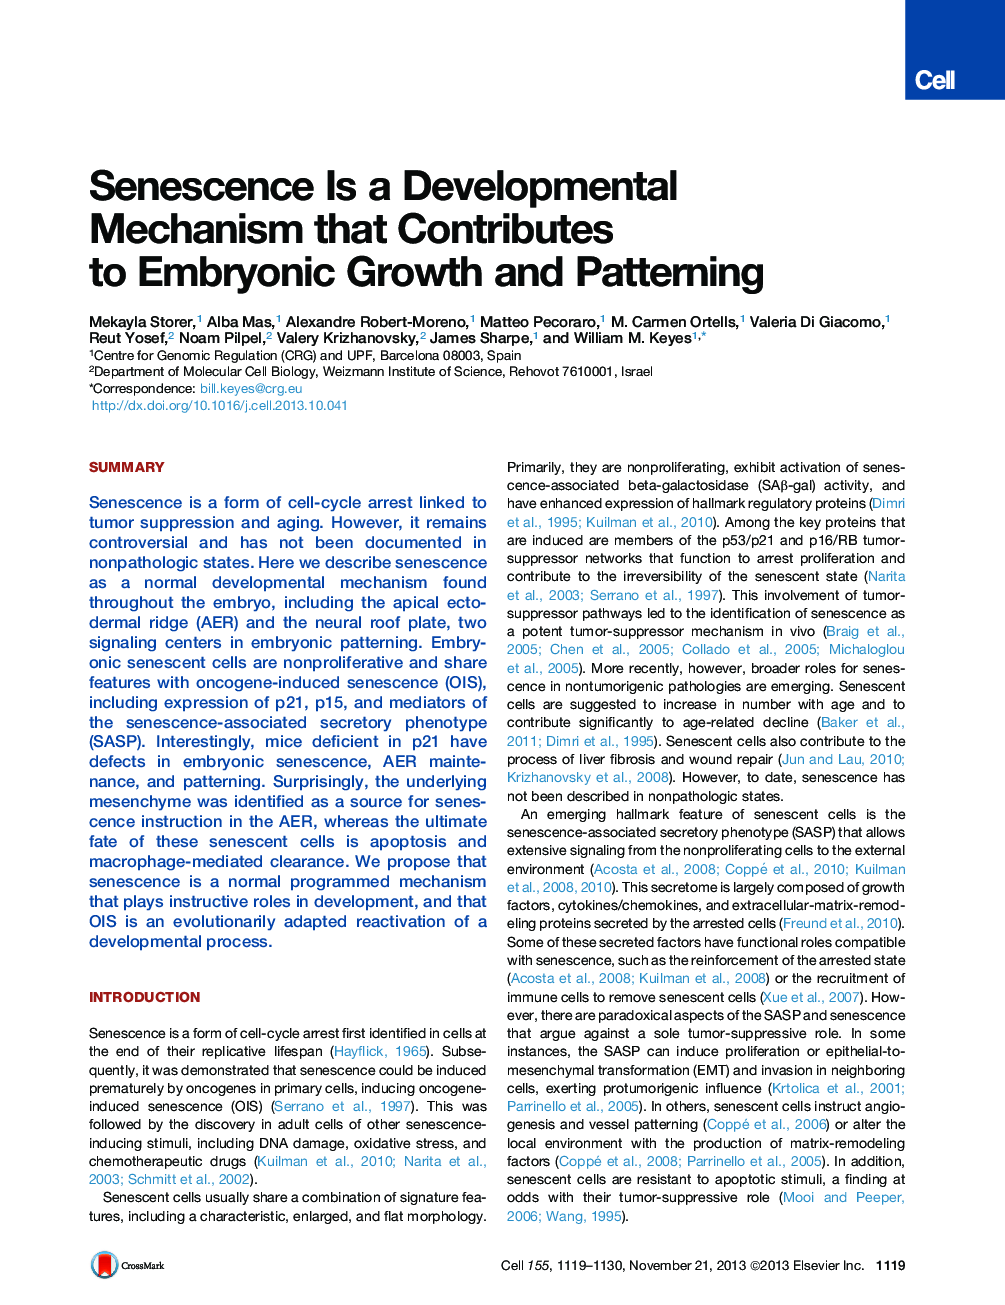 Senescence Is a Developmental Mechanism that Contributes to Embryonic Growth and Patterning